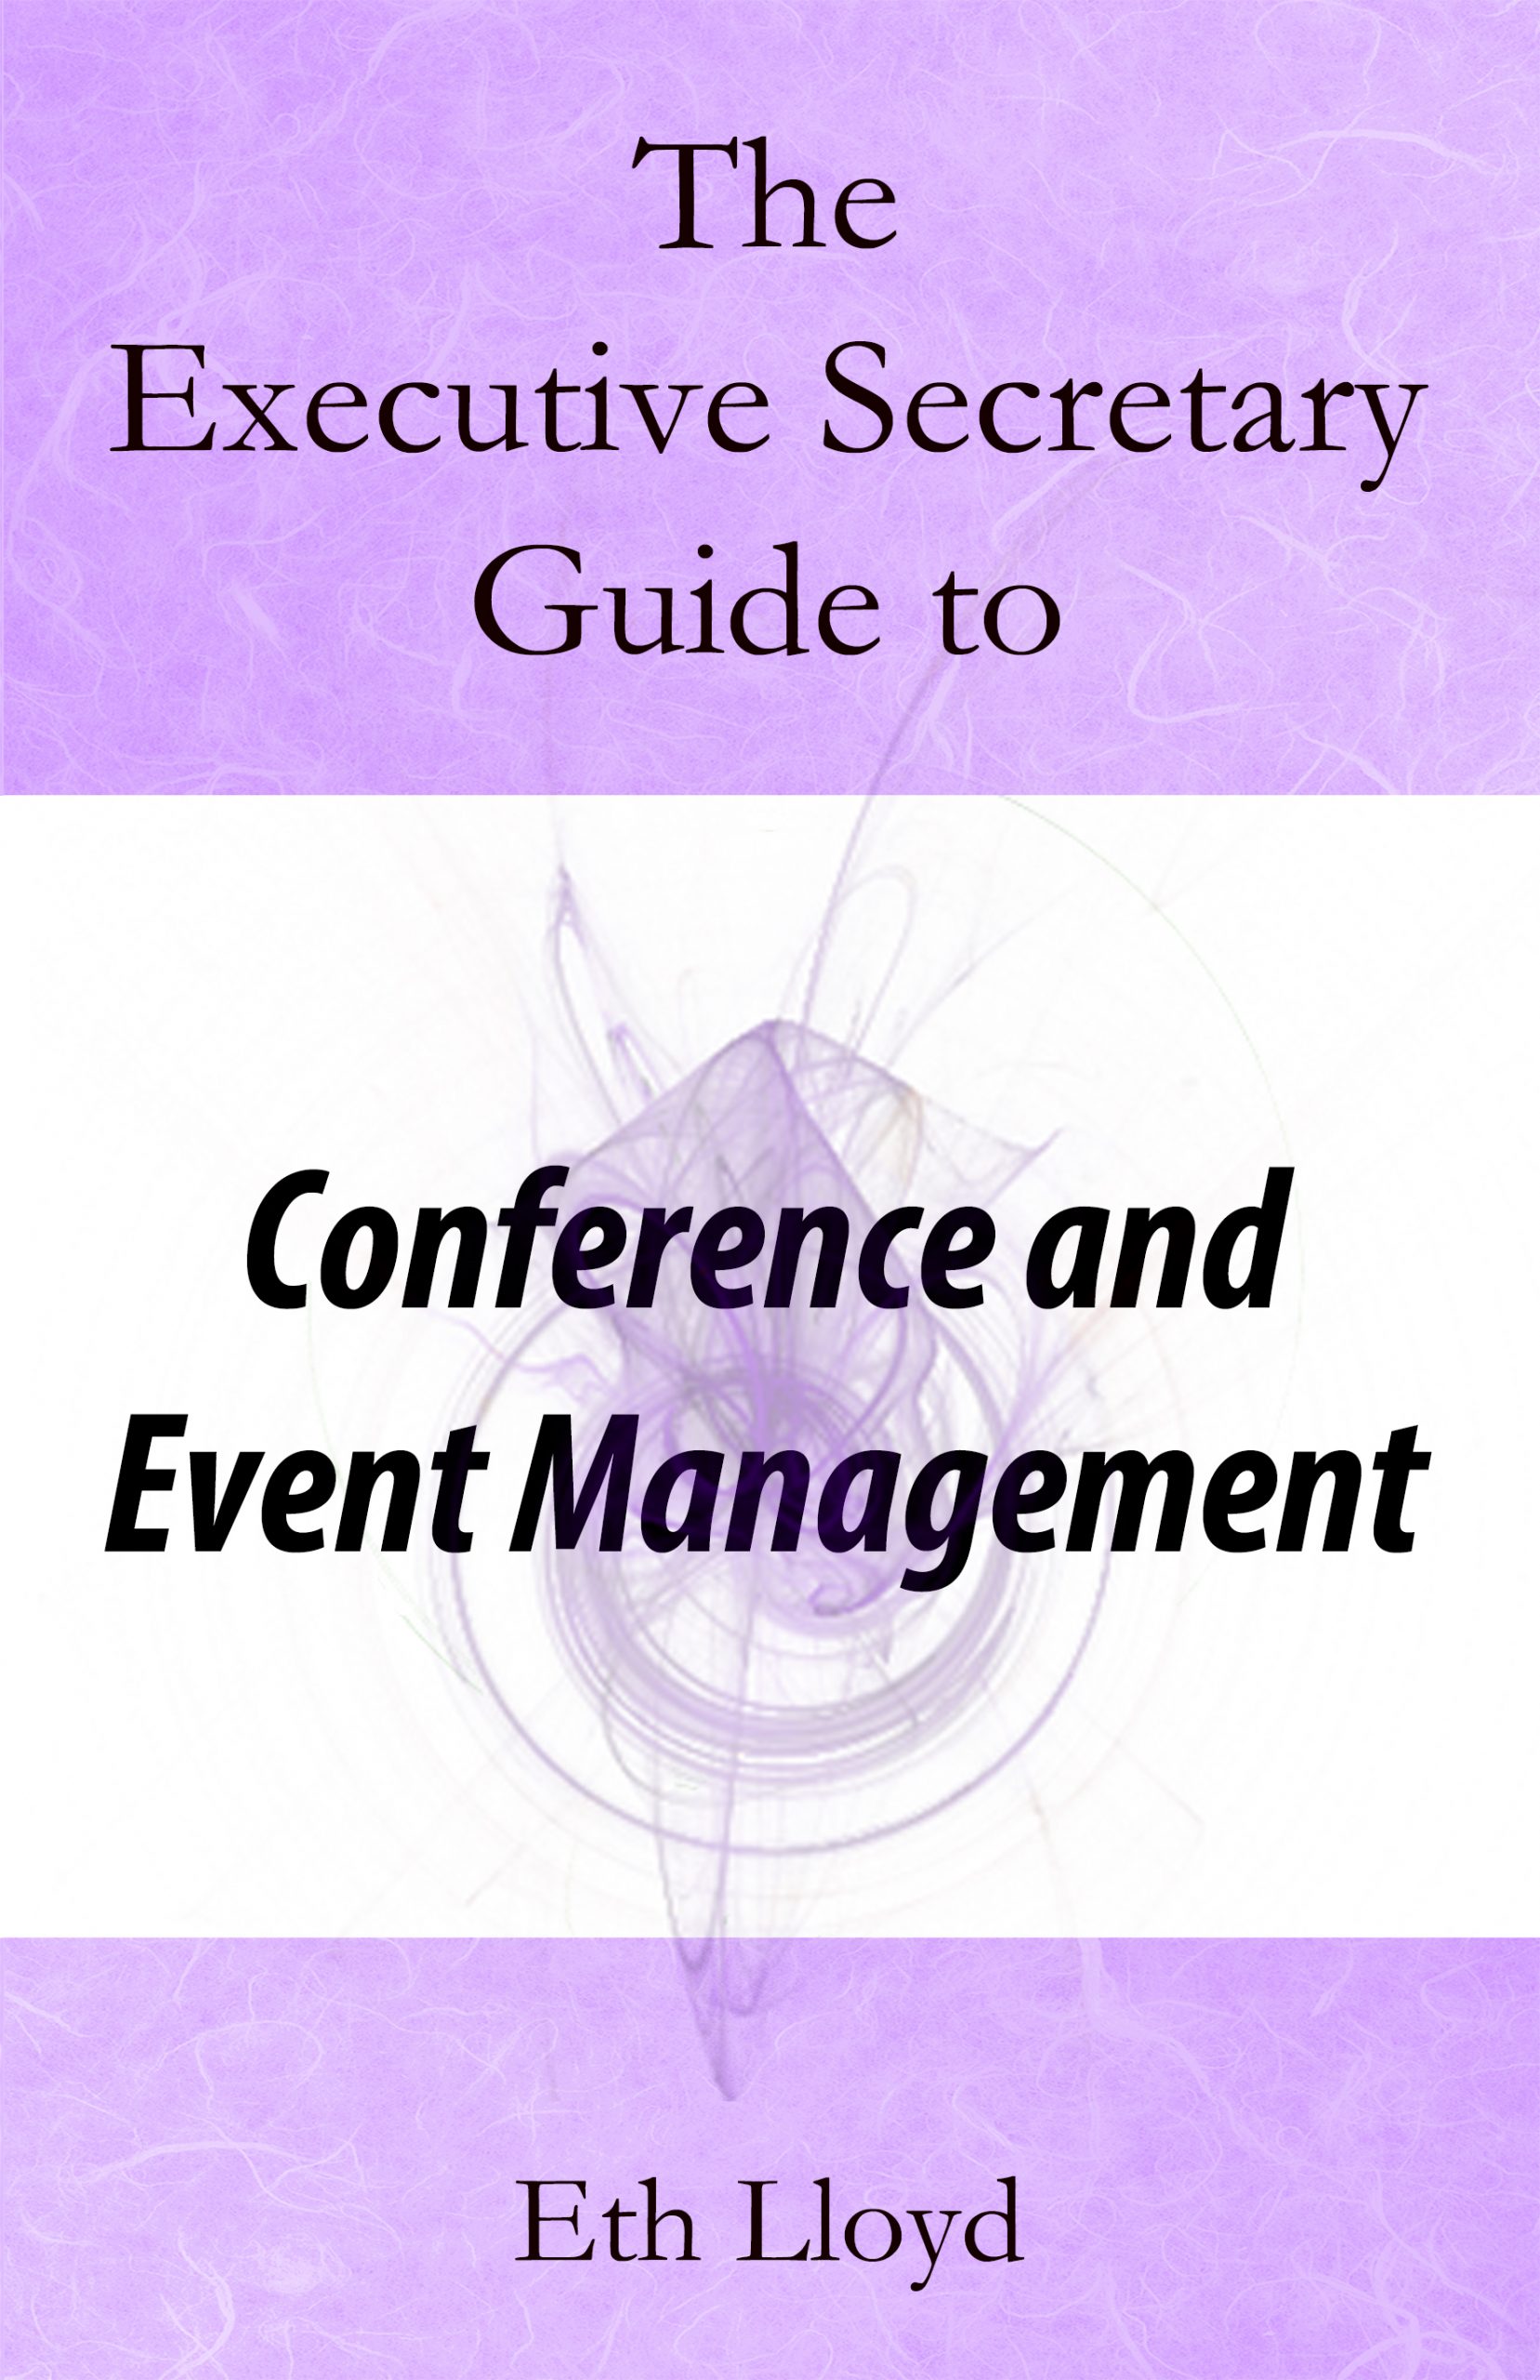 The Executive Secretary Guide to Conference and Event Management